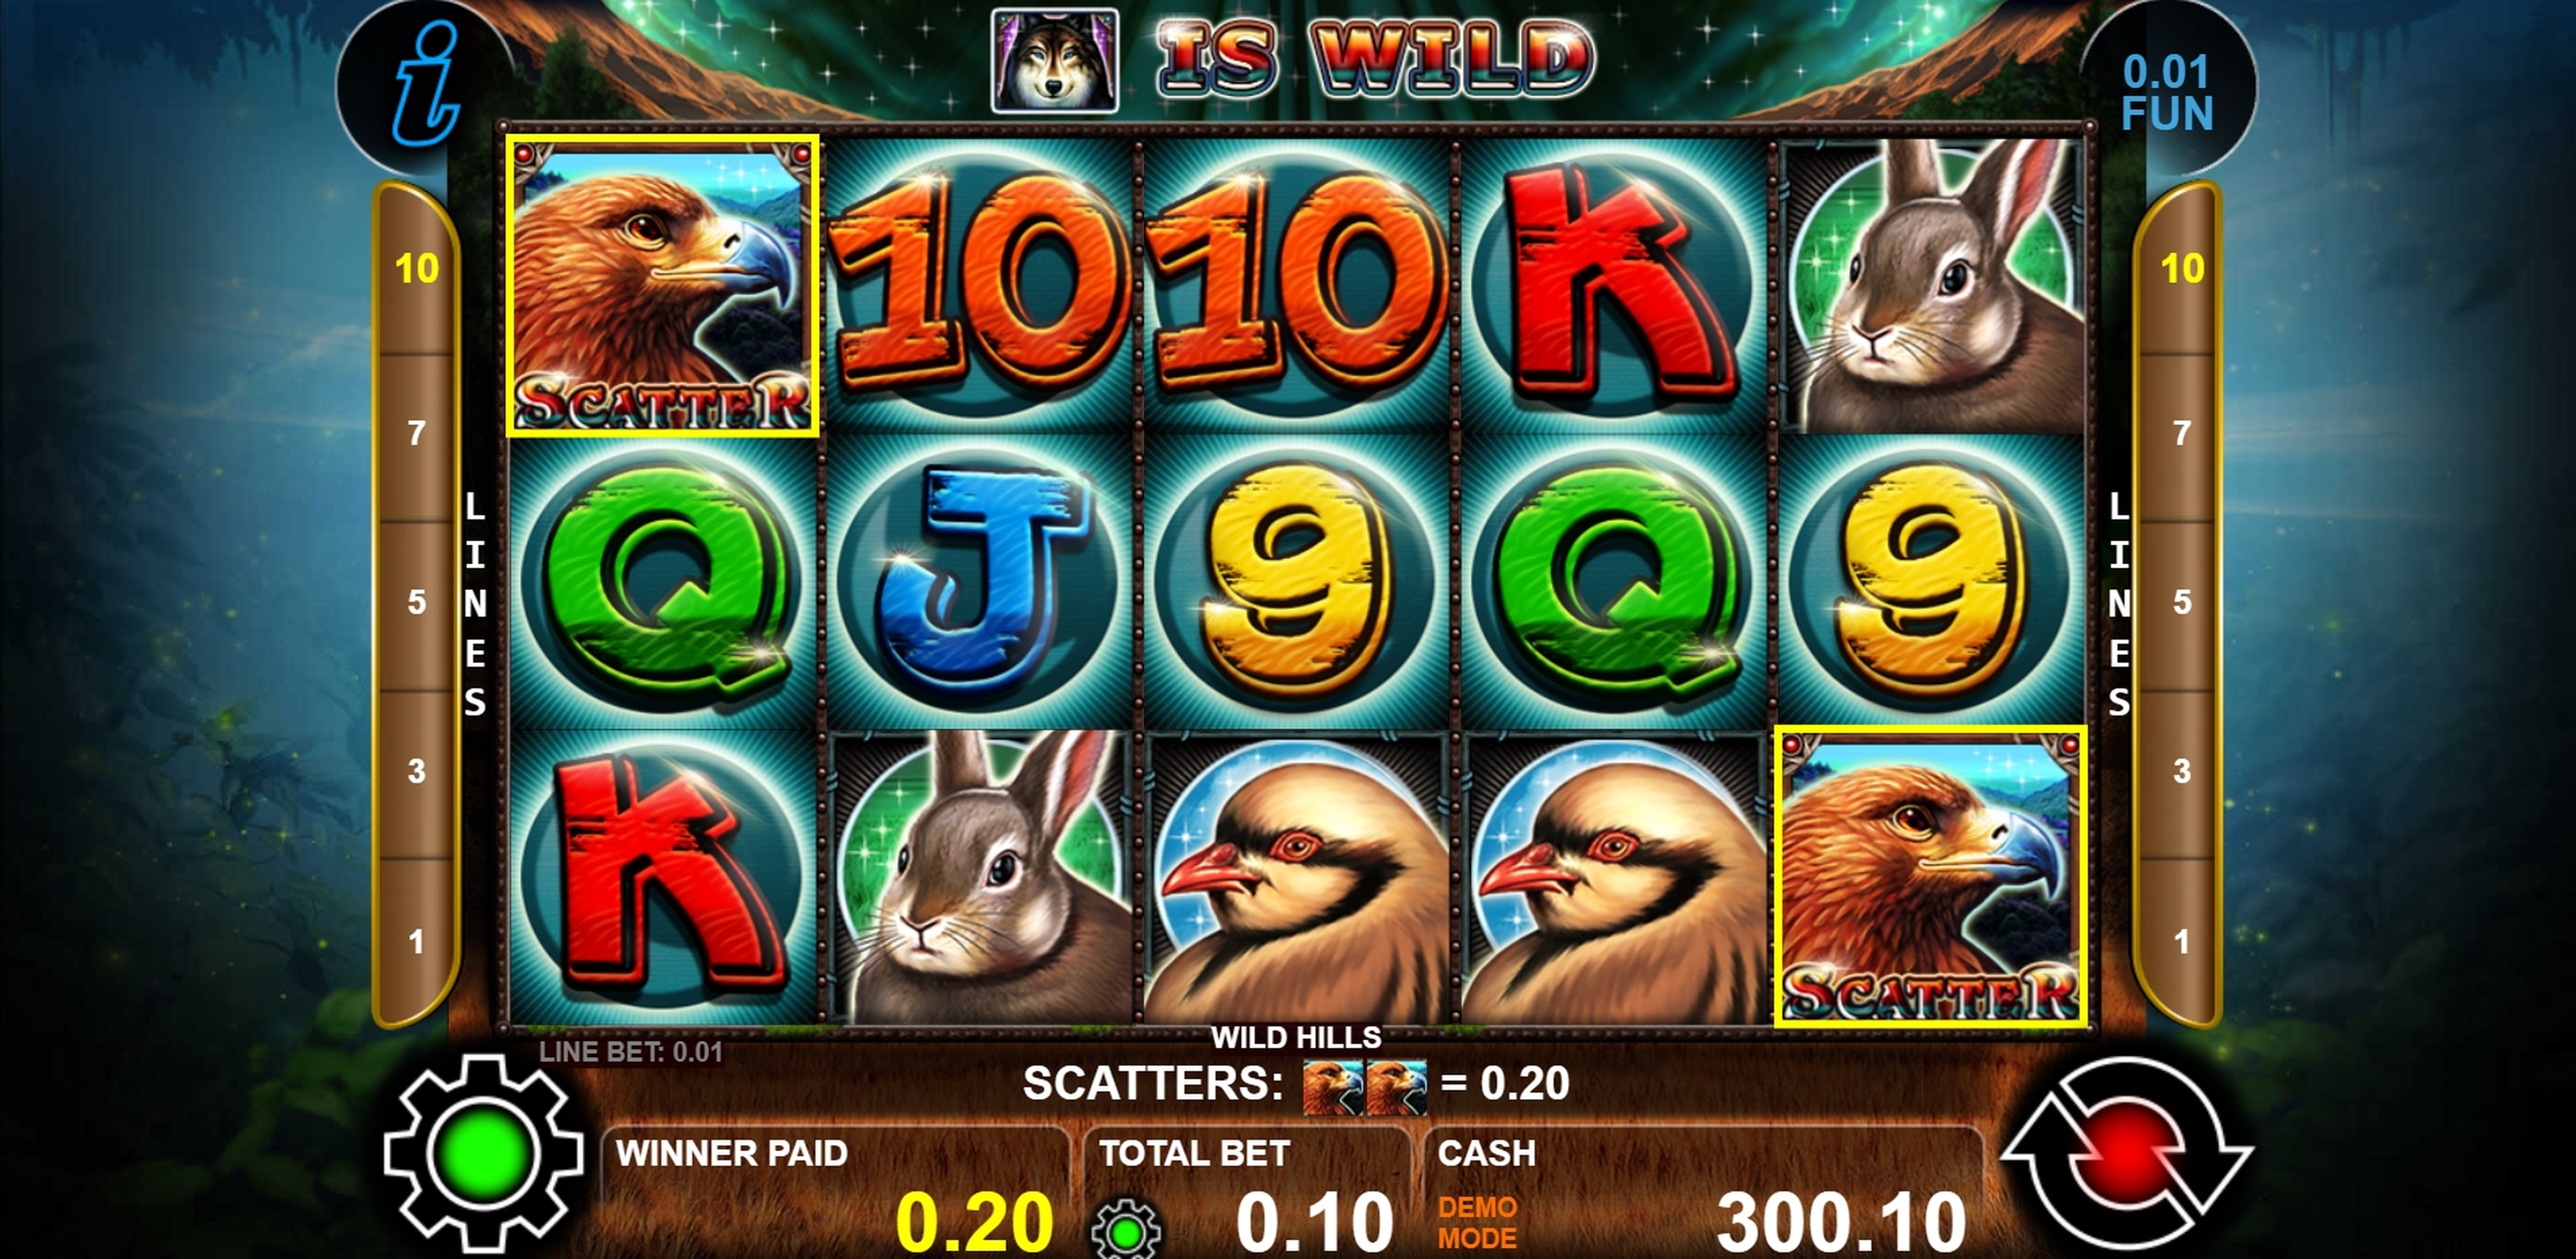 Win Money in Wild Hills Free Slot Game by casino technology